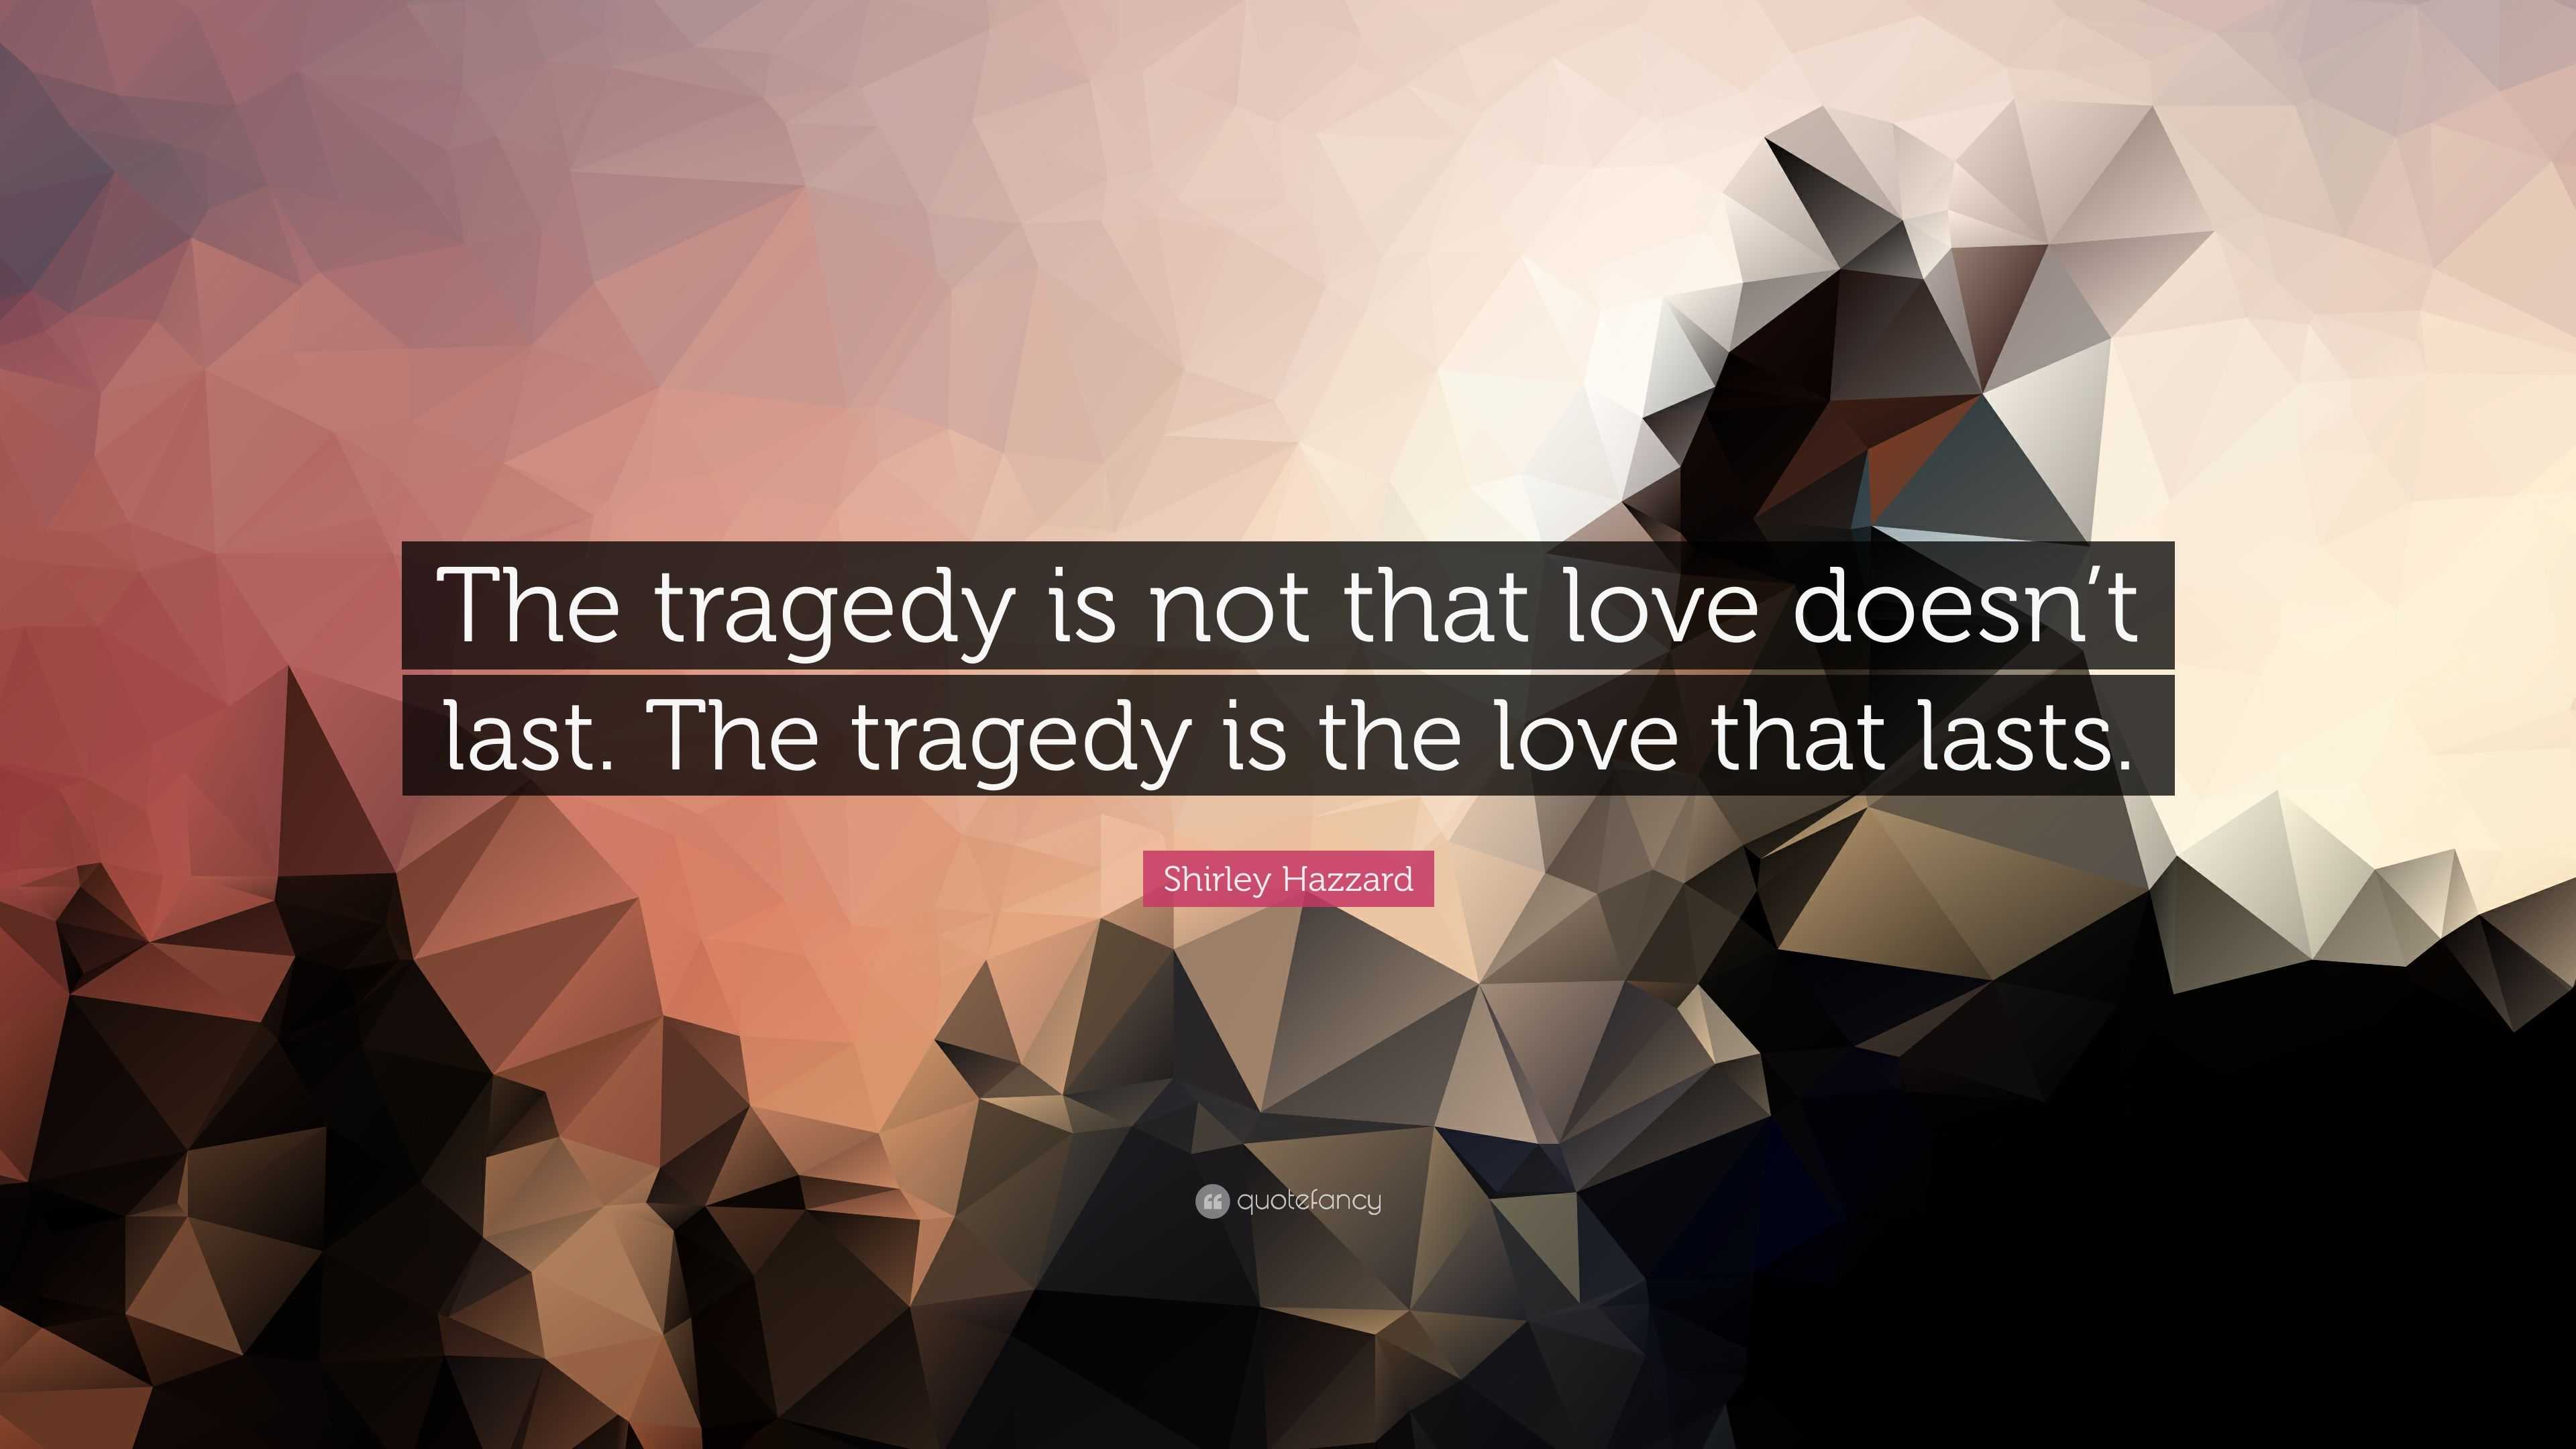 Shirley Hazzard Quote “The tragedy is not that love doesn t last